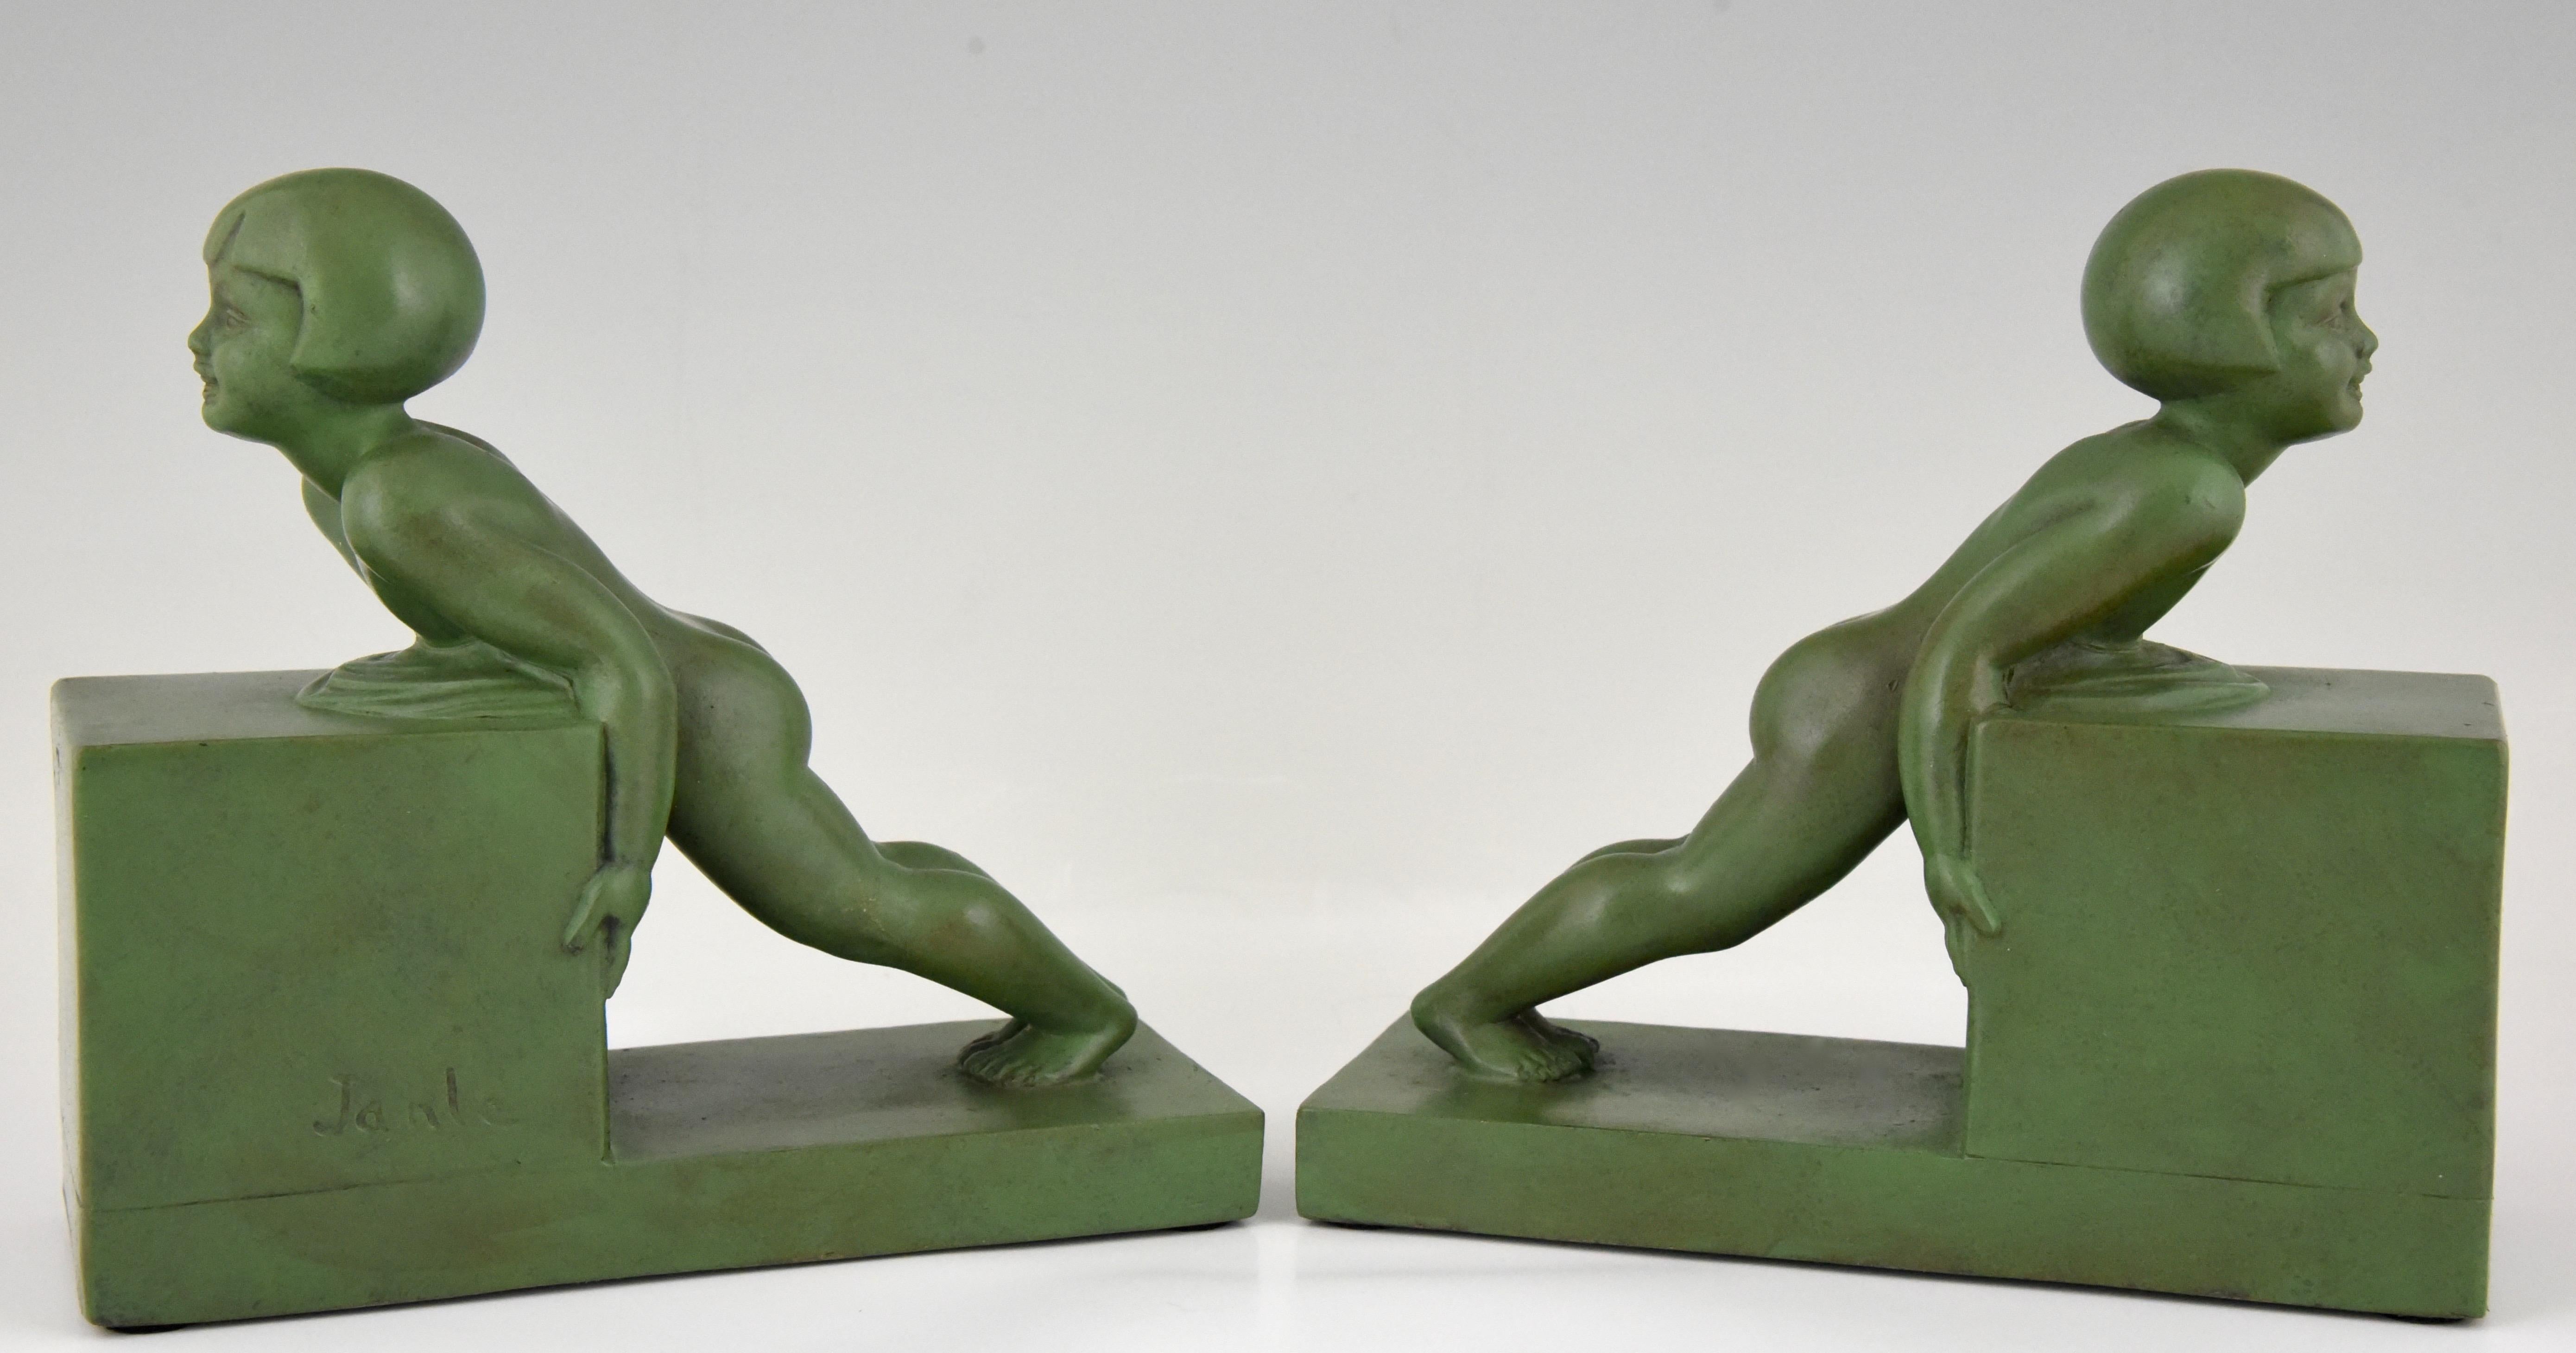 French Art Deco Bookends with Children Signed Janle, France, 1930